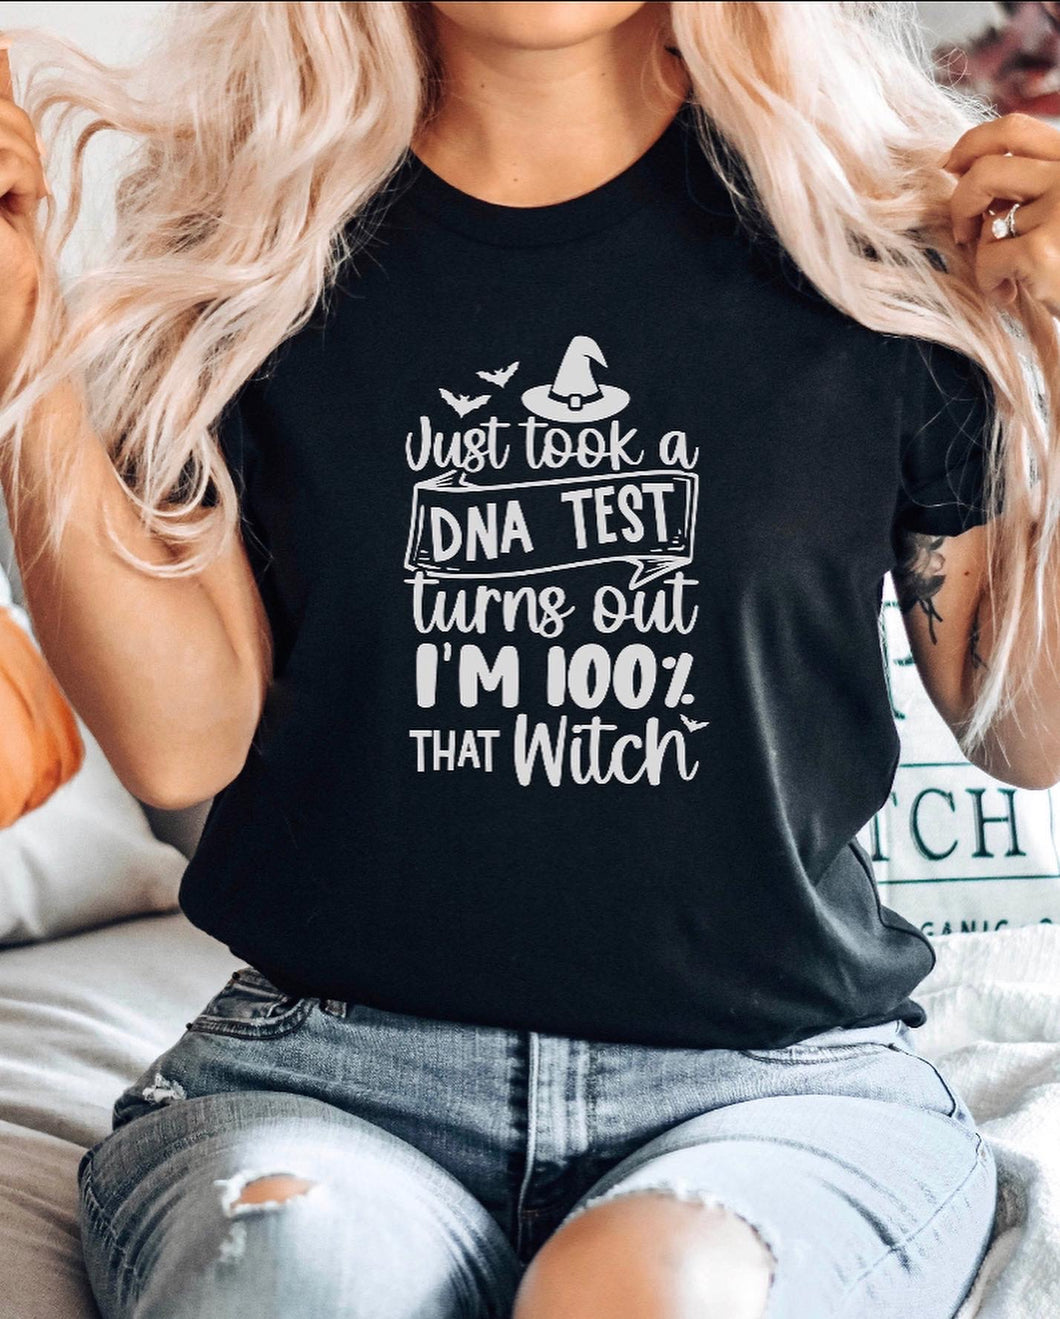 100% That witch T-shirt